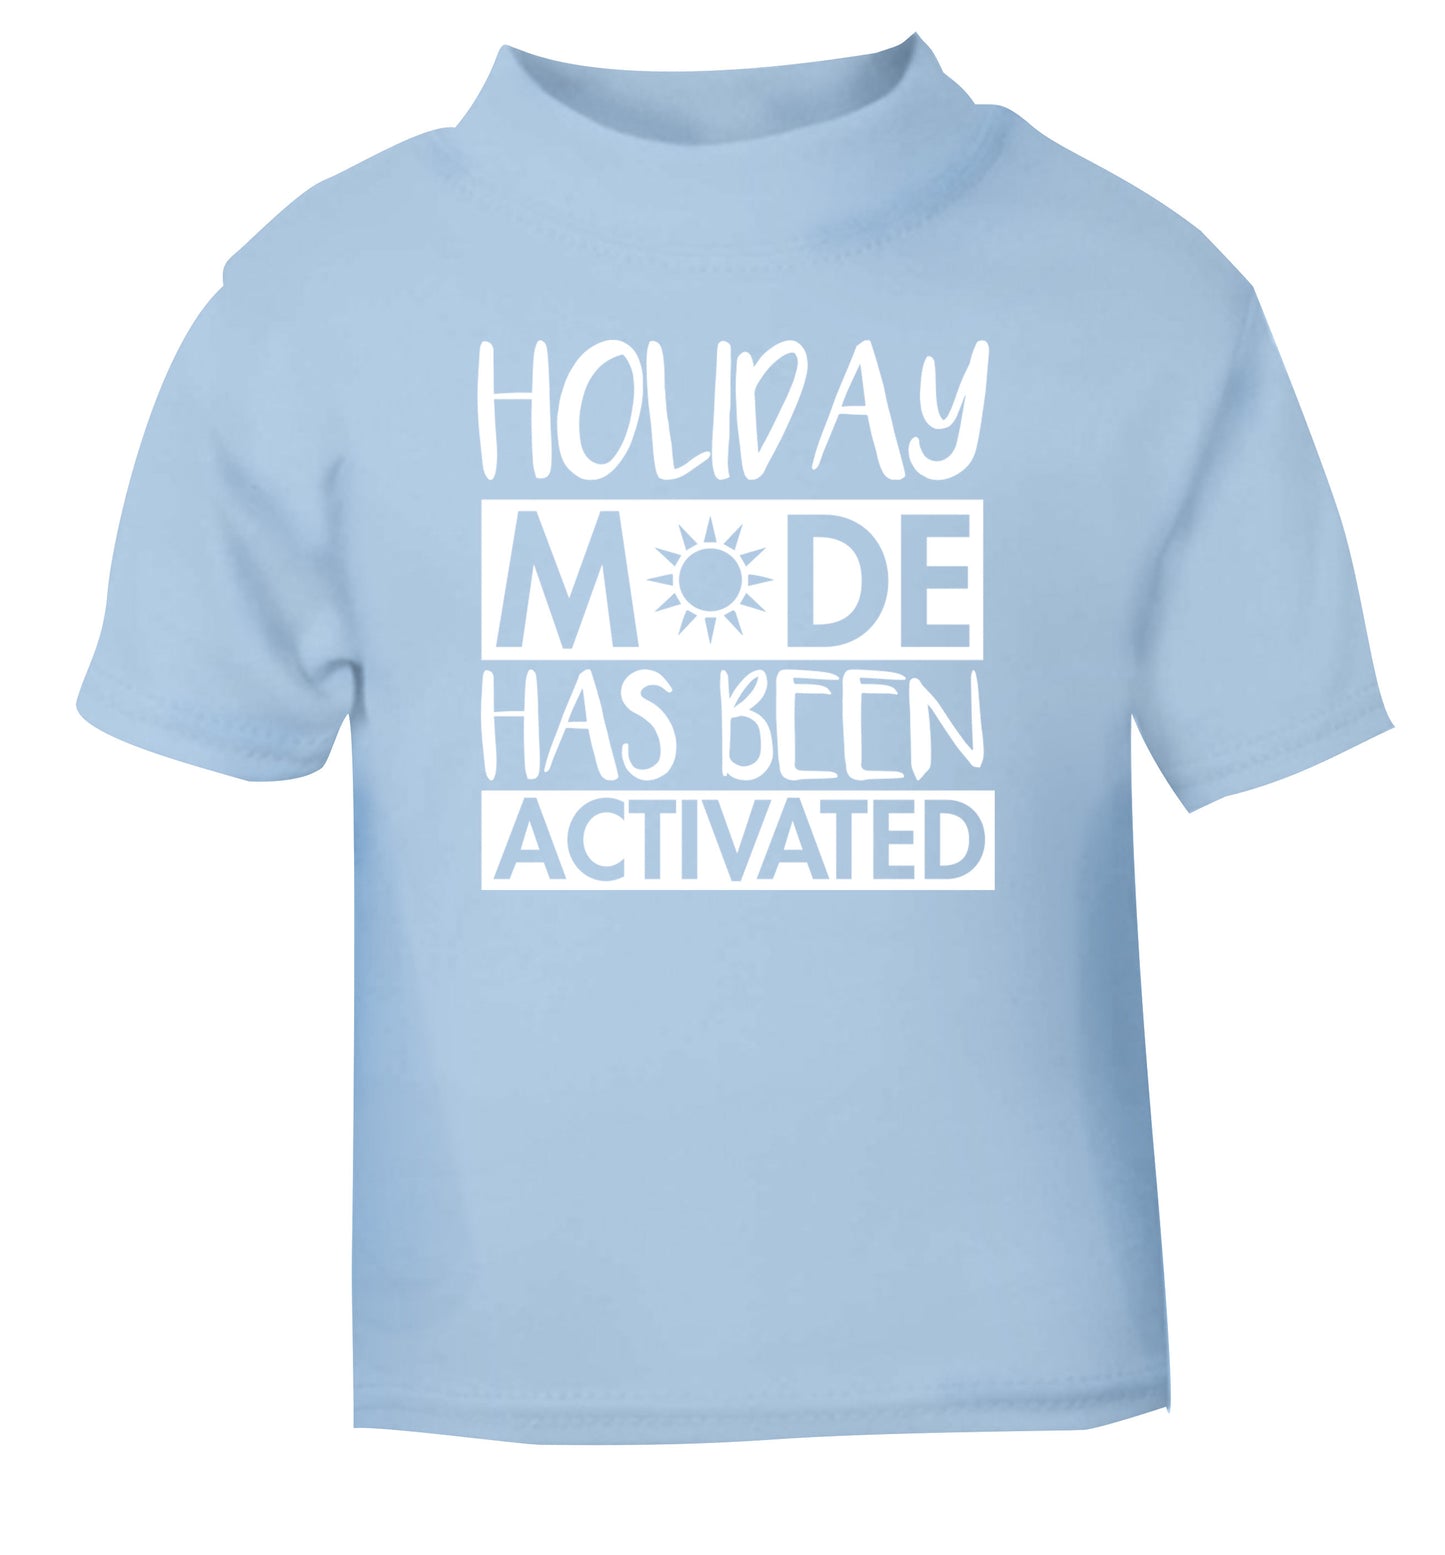 Holiday mode has been activated light blue Baby Toddler Tshirt 2 Years